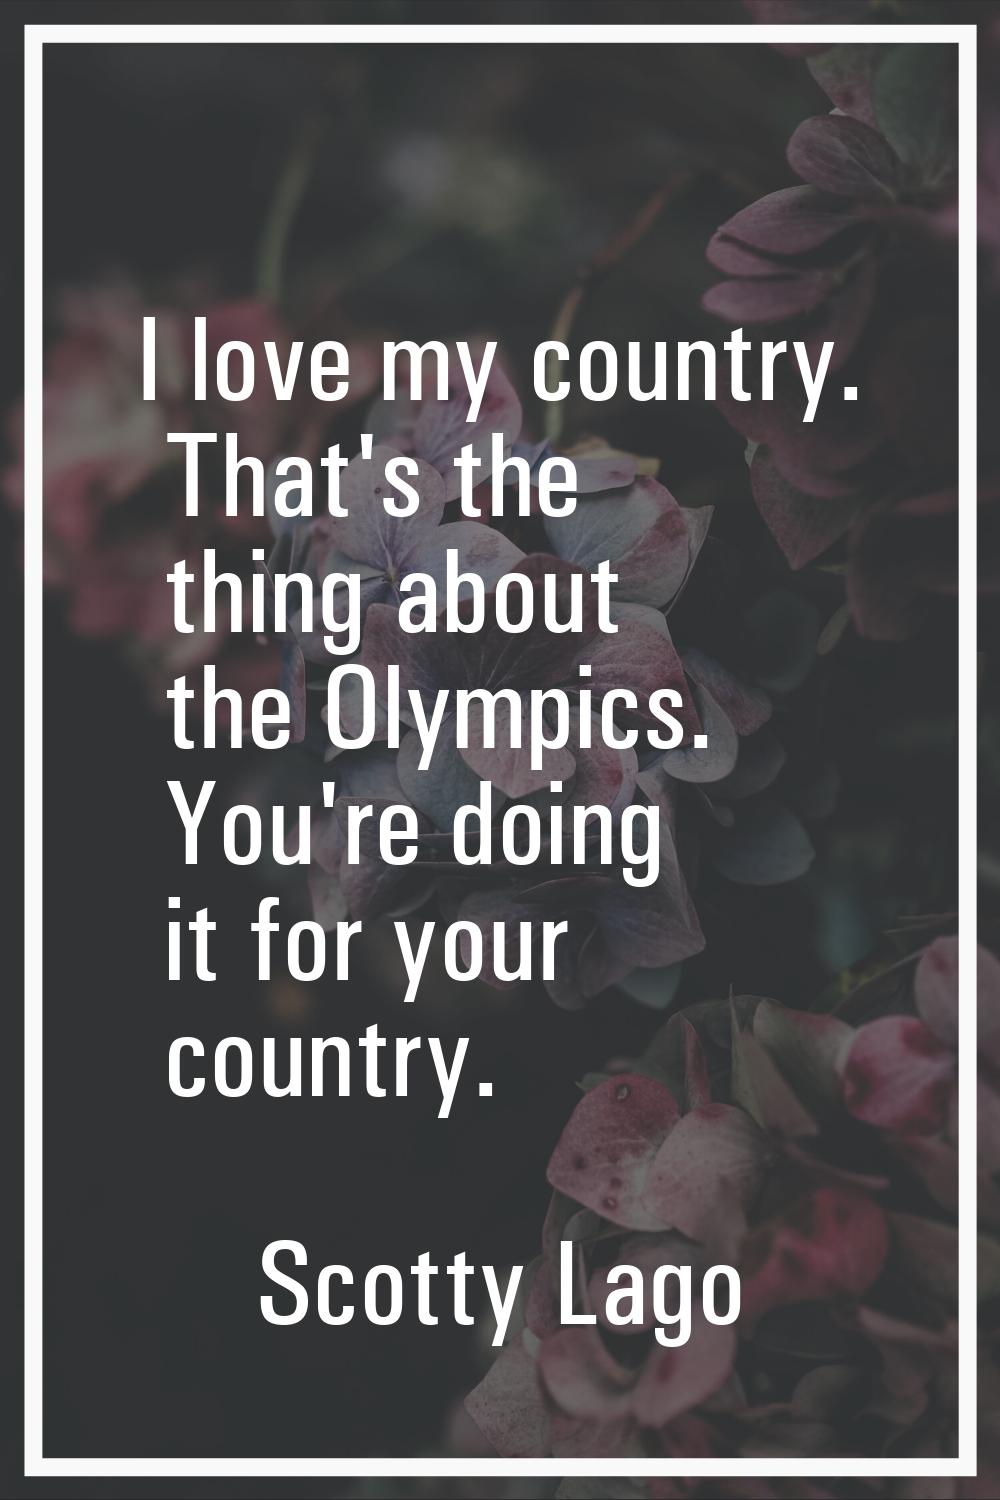 I love my country. That's the thing about the Olympics. You're doing it for your country.